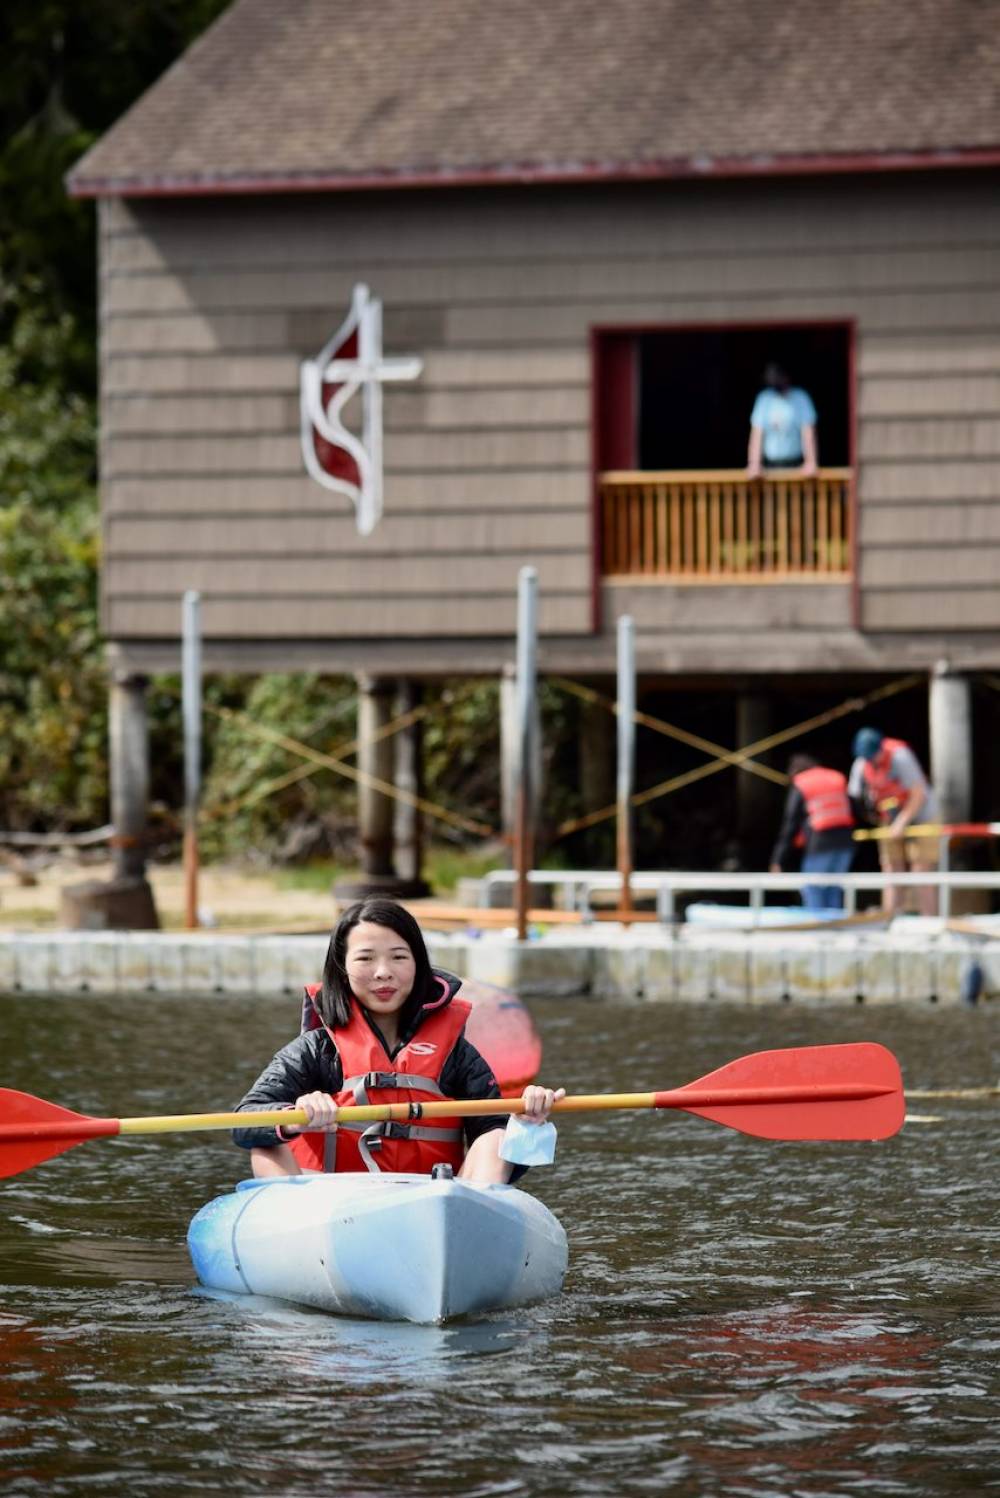 TOP OREGON SPORTS CAMP: Camp Magruder is a Top Sports Summer Camp located in Rockaway Beach Oregon offering many fun and enriching Sports and other camp programs. 